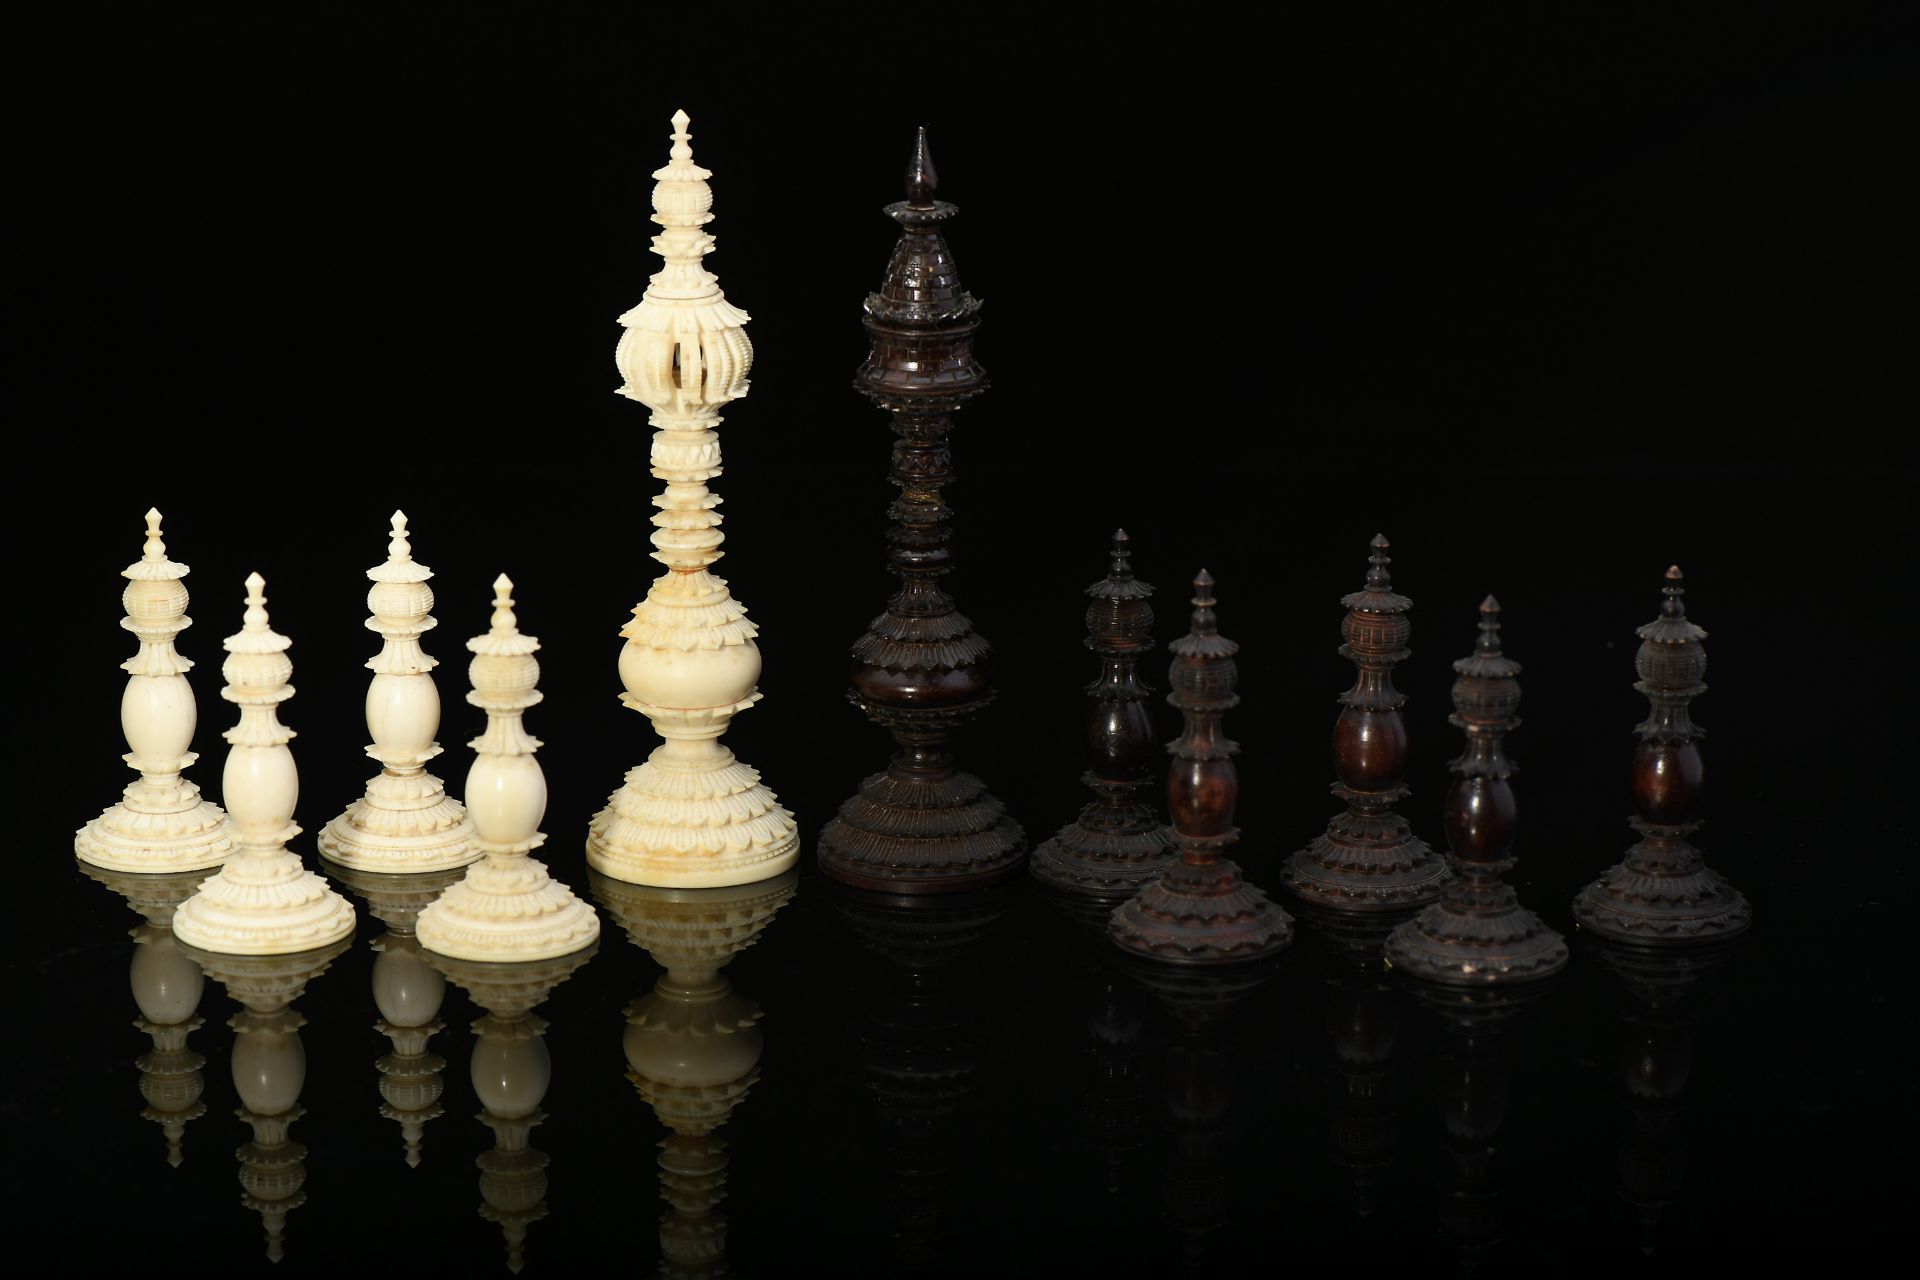 Chess pieces - two kings and nine pawns